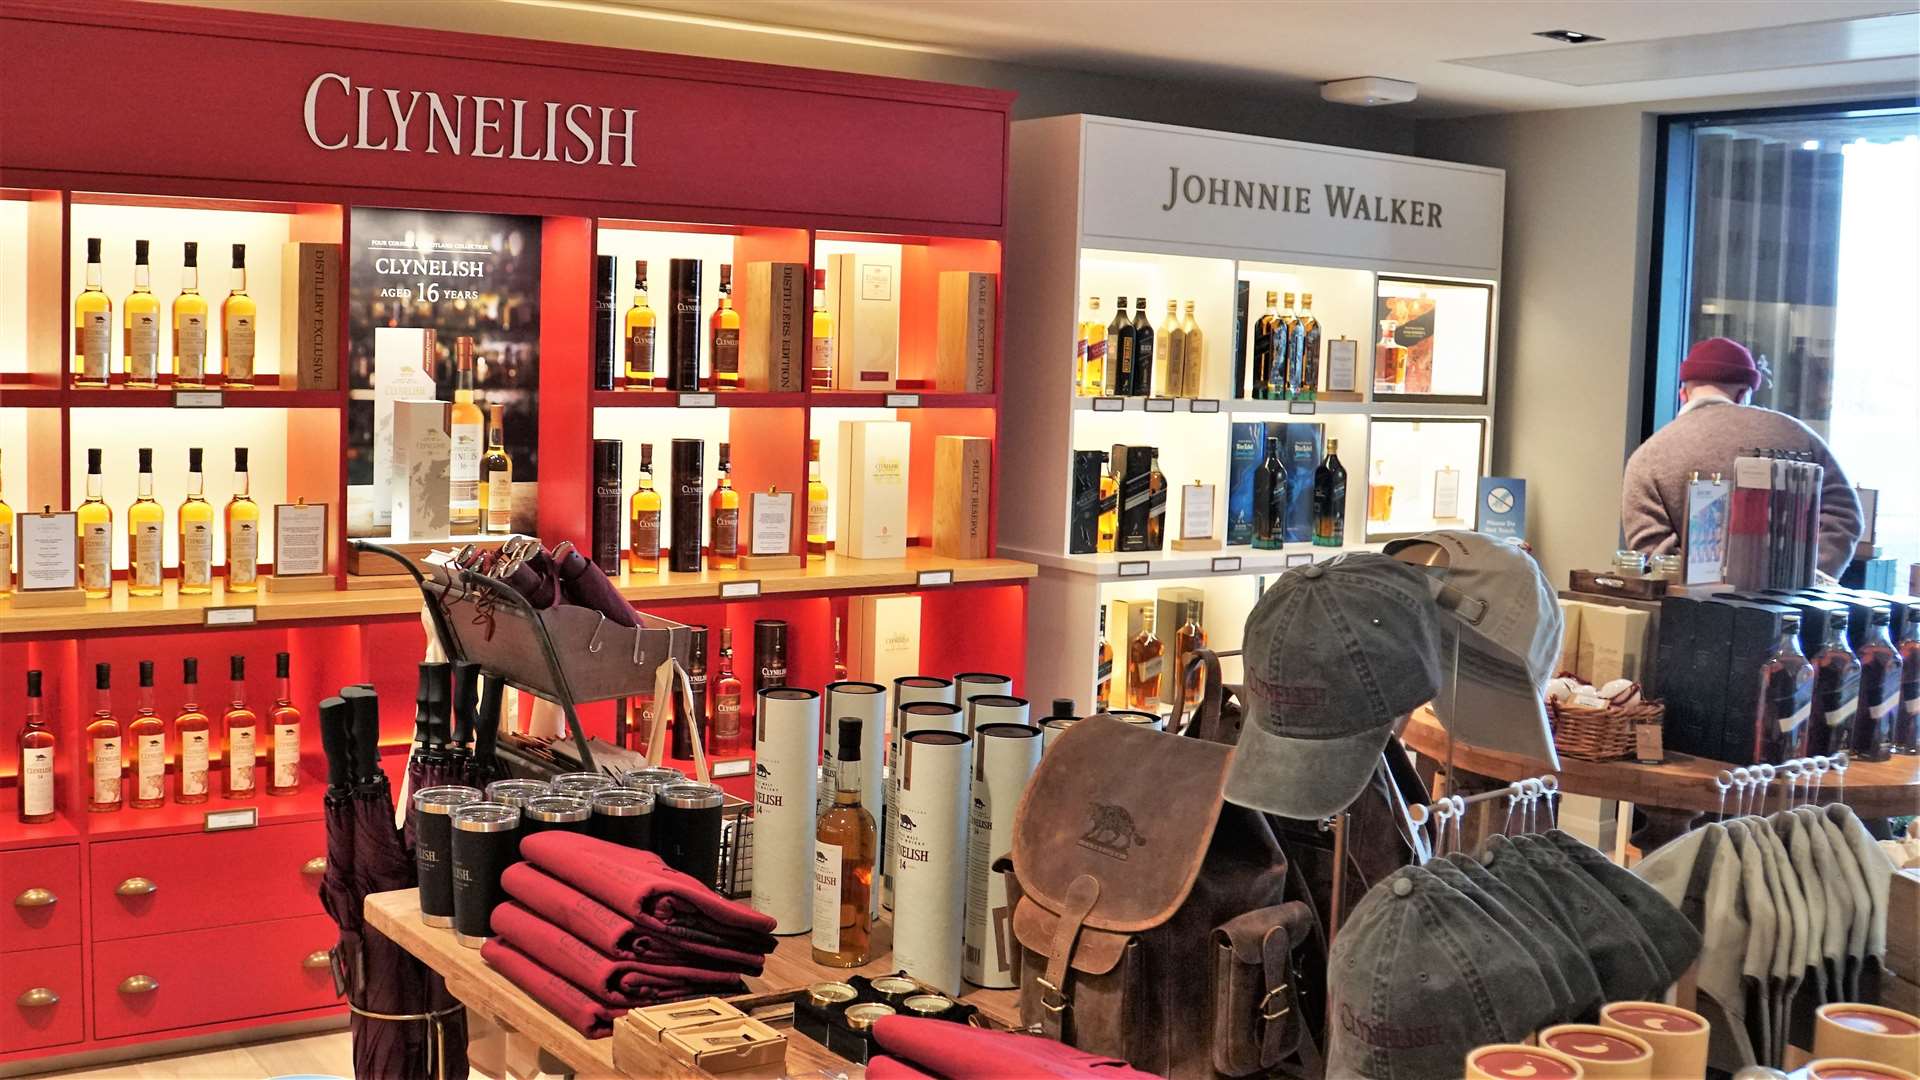 The tour ends at the shop where many Johnnie Walker whiskies are available along with quality gifts.